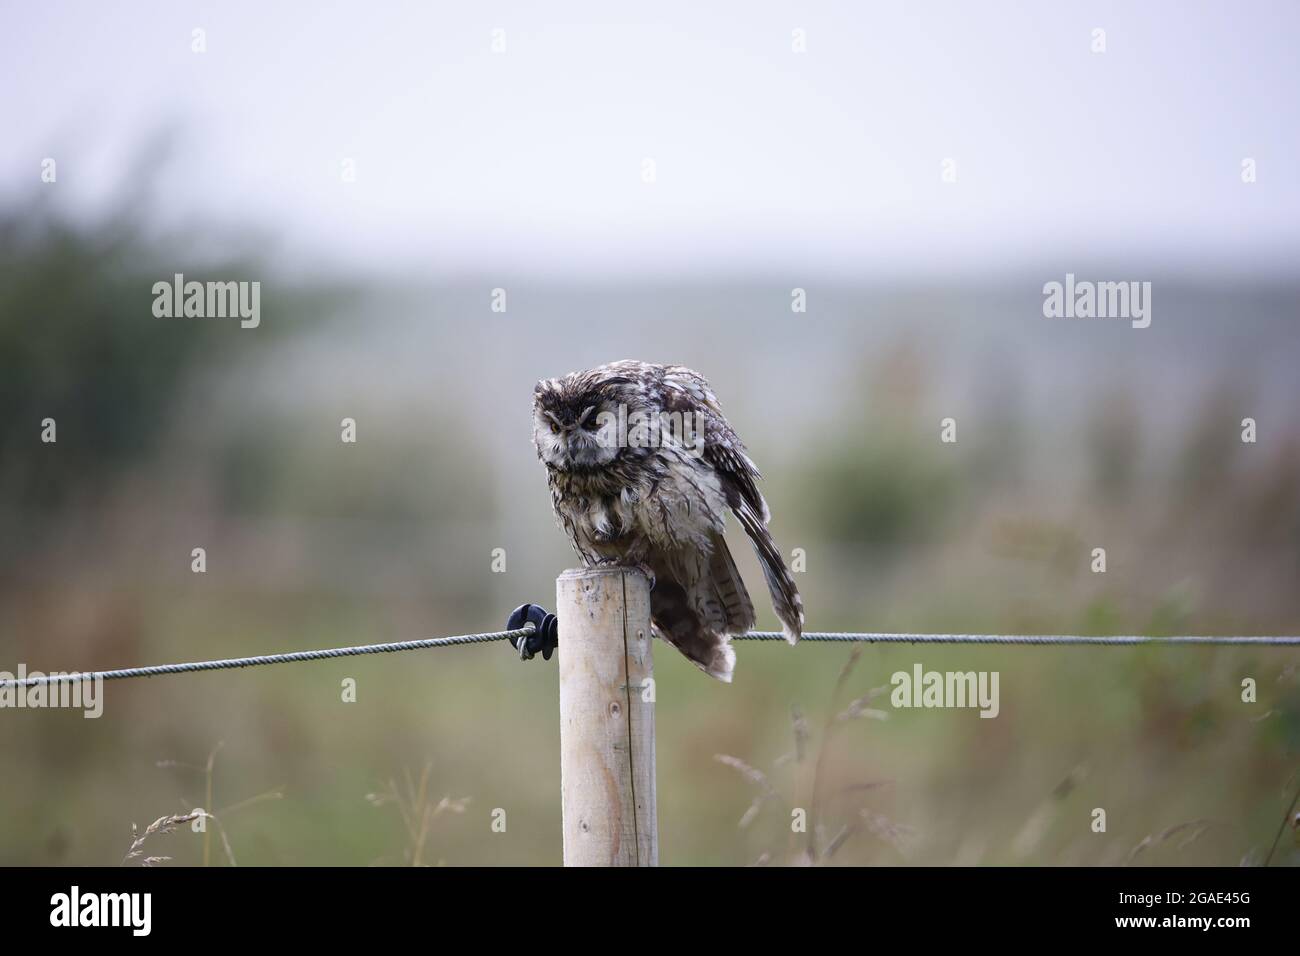 Long eared owl perched on a fence post preening after a rain shower. Stock Photo